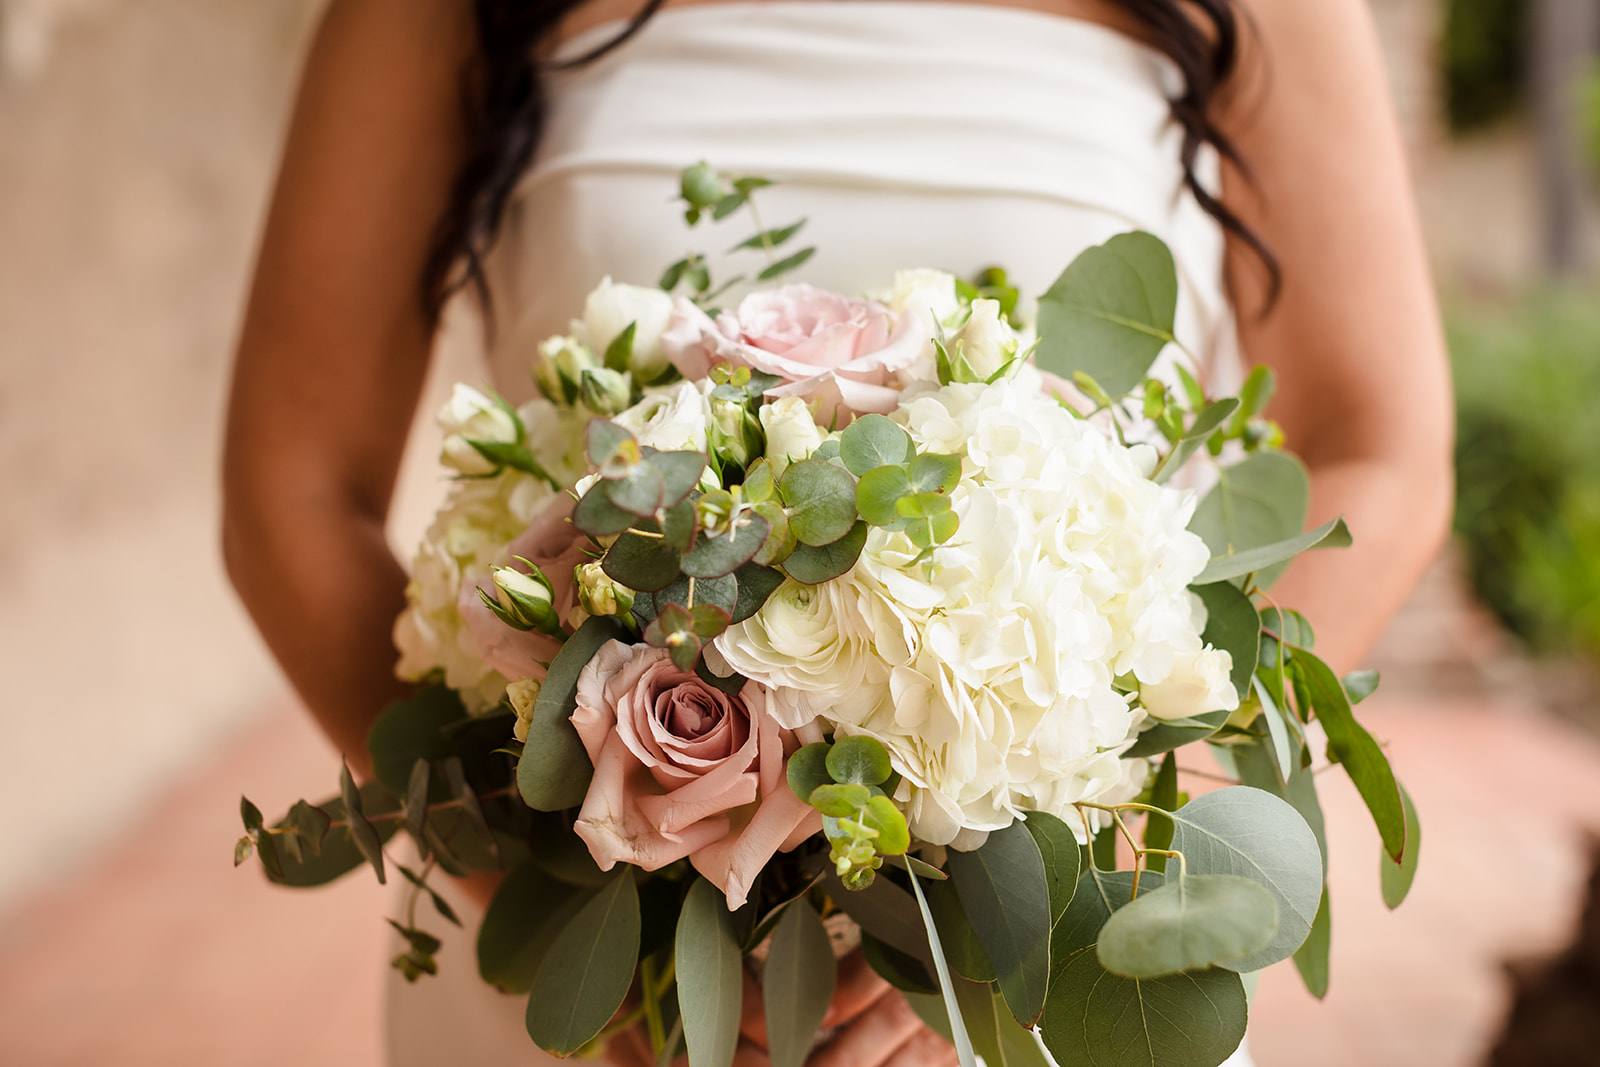 Bridal bouquet of dusty pink roses, white hydrangeas, and eucalyptus leaves